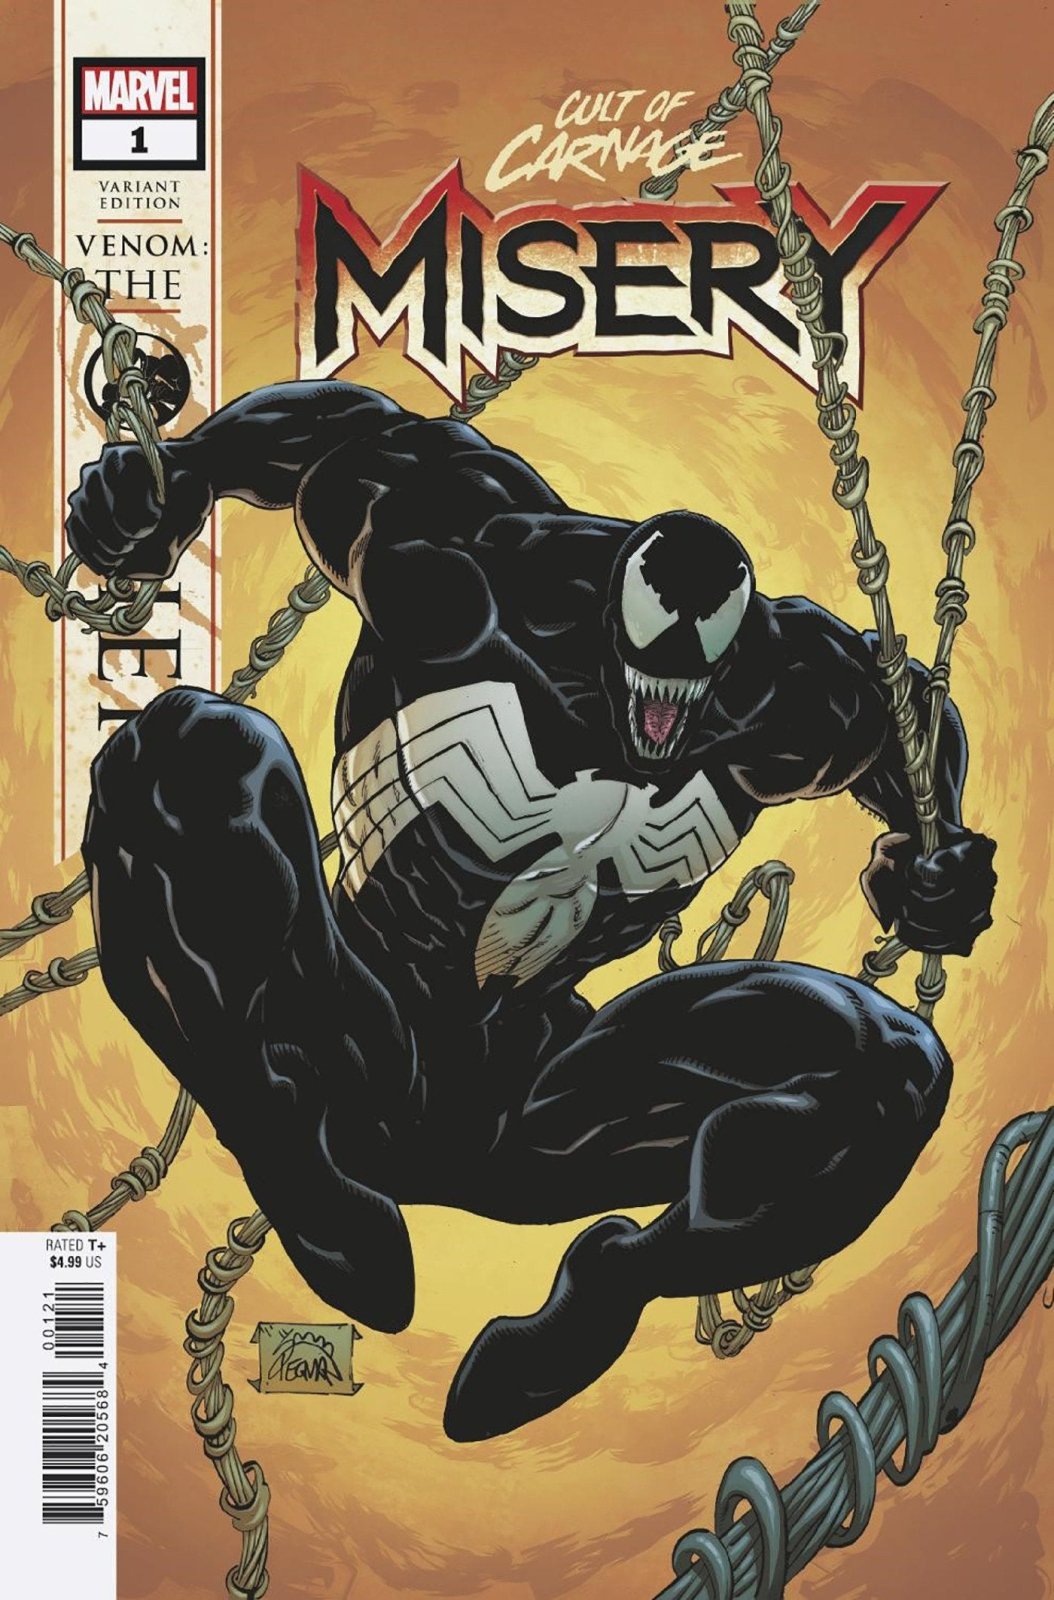 Cult Of Carnage: Misery 1 Ryan Stegman Venom The Other Variant - The Fourth Place